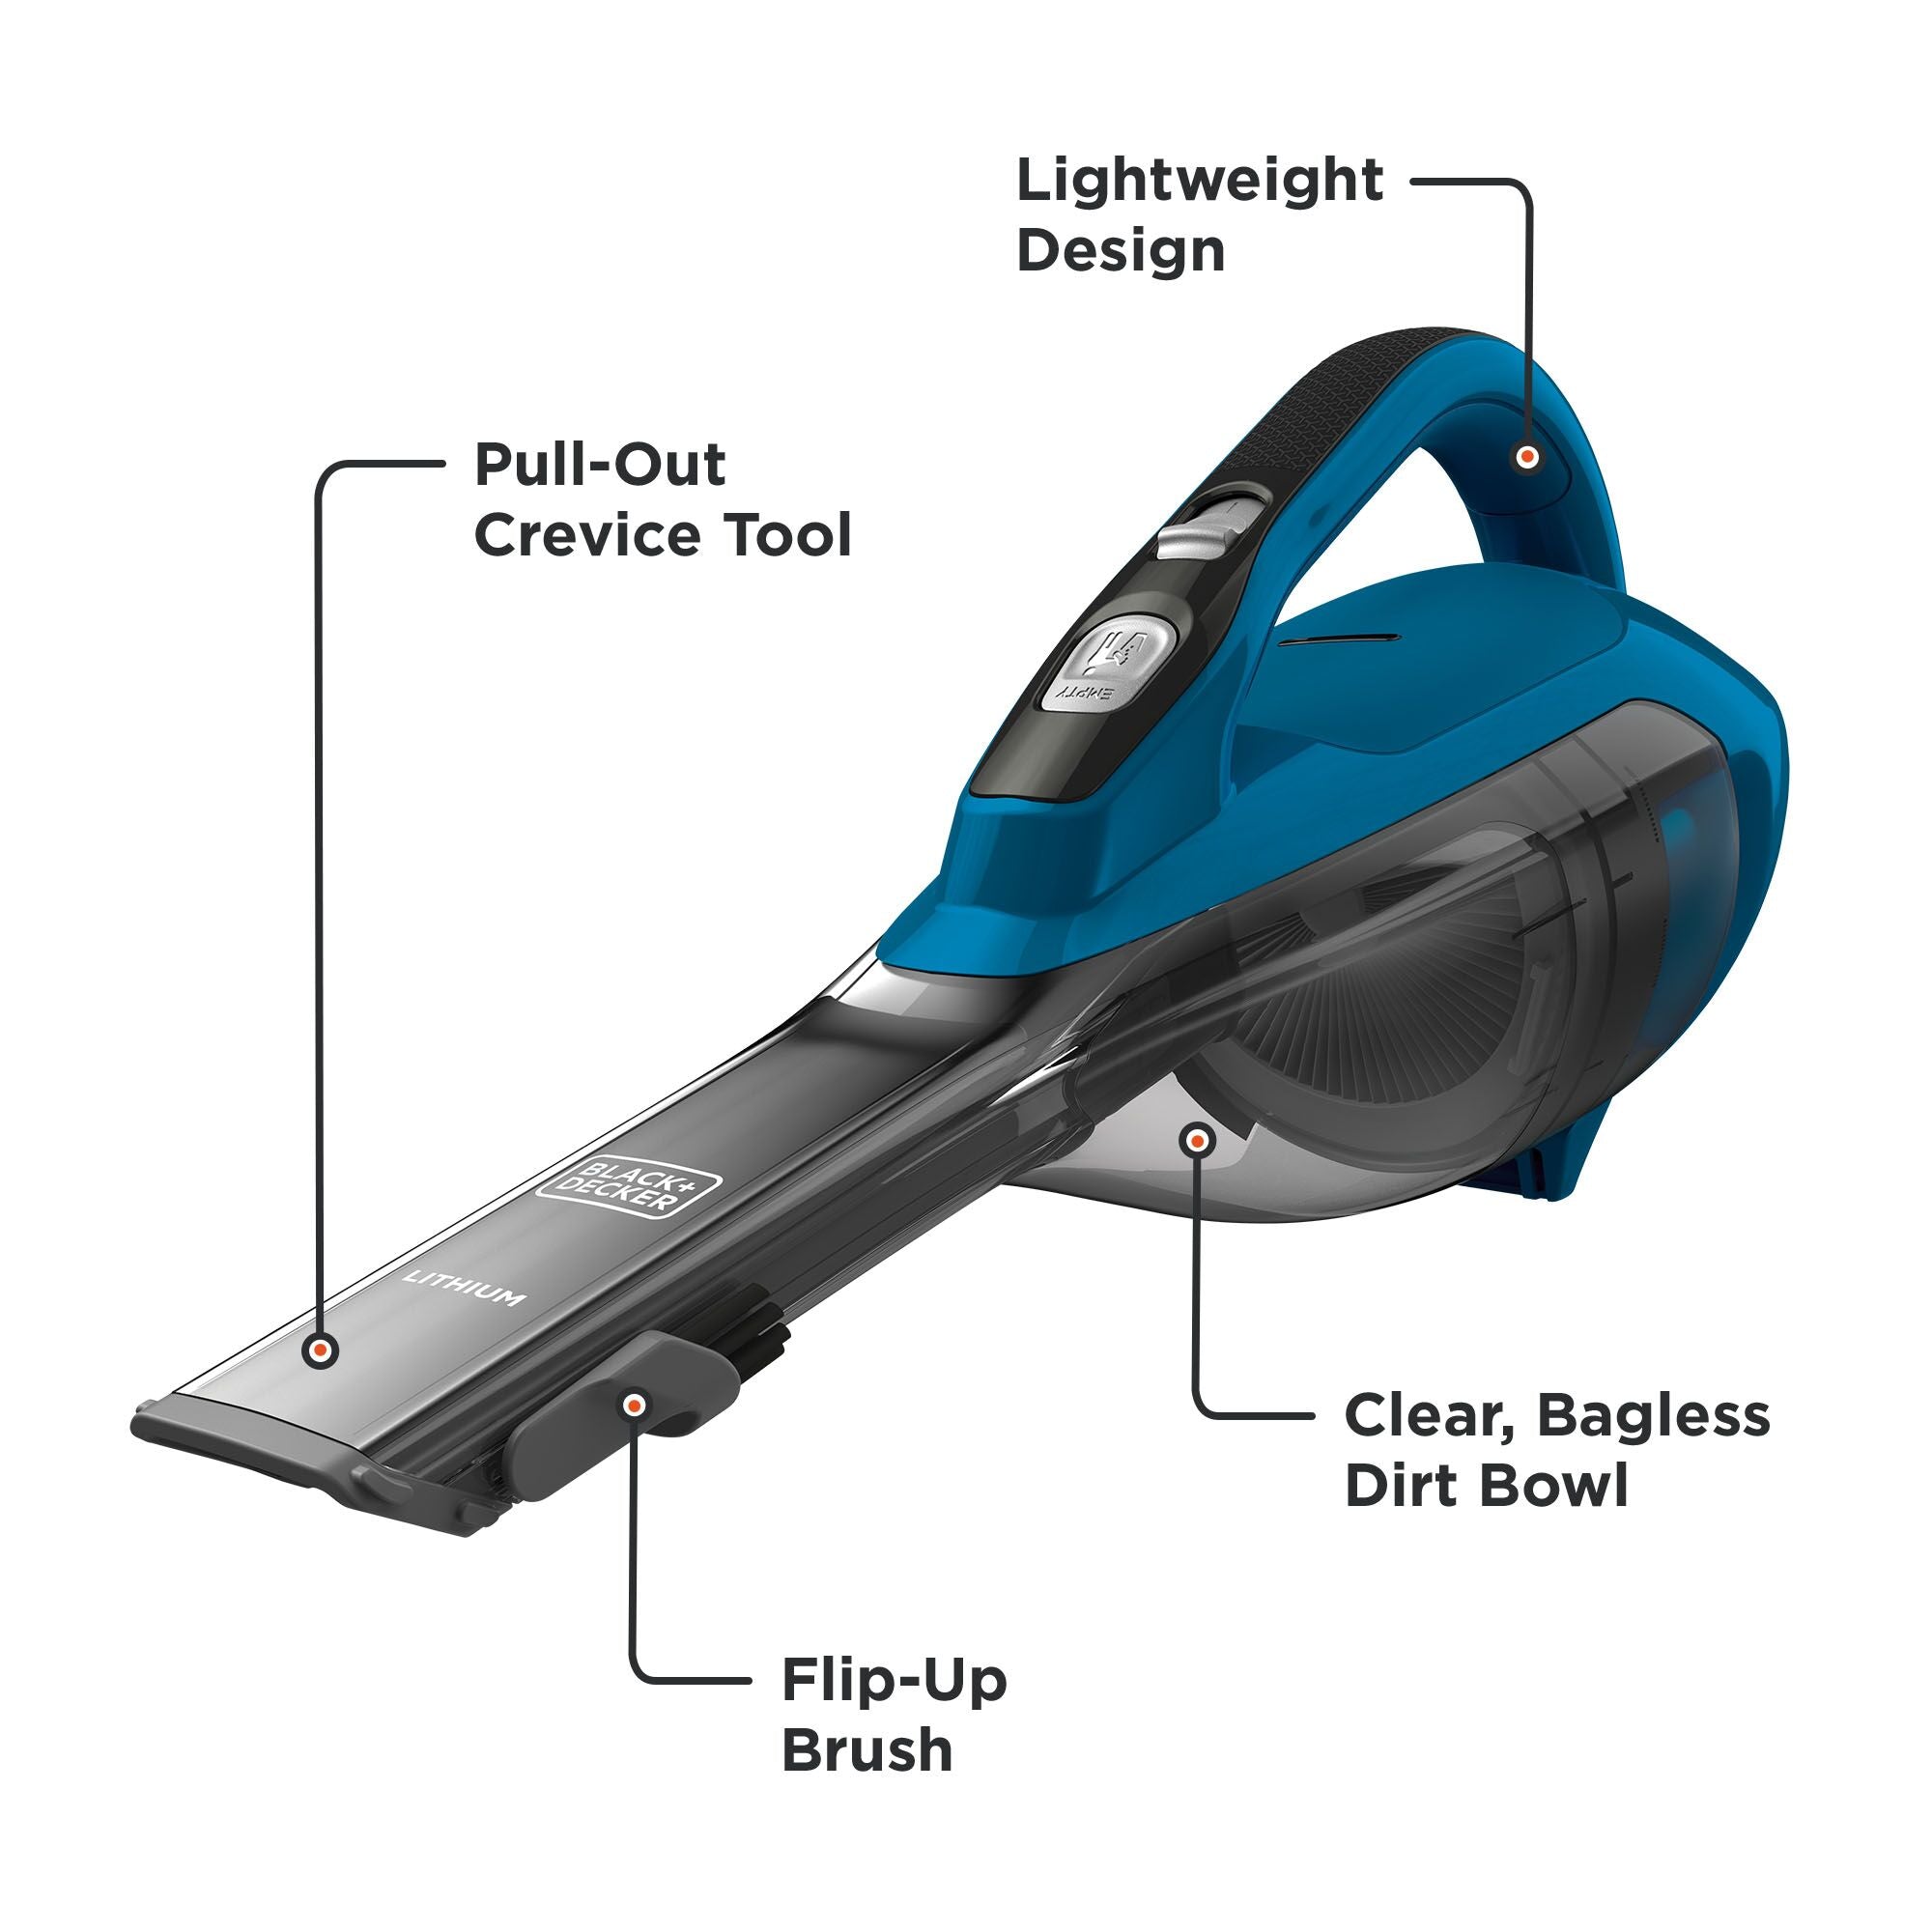 BLACK+DECKER™ dustbuster® Turns 40, Celebrates with New Hand Vacuum